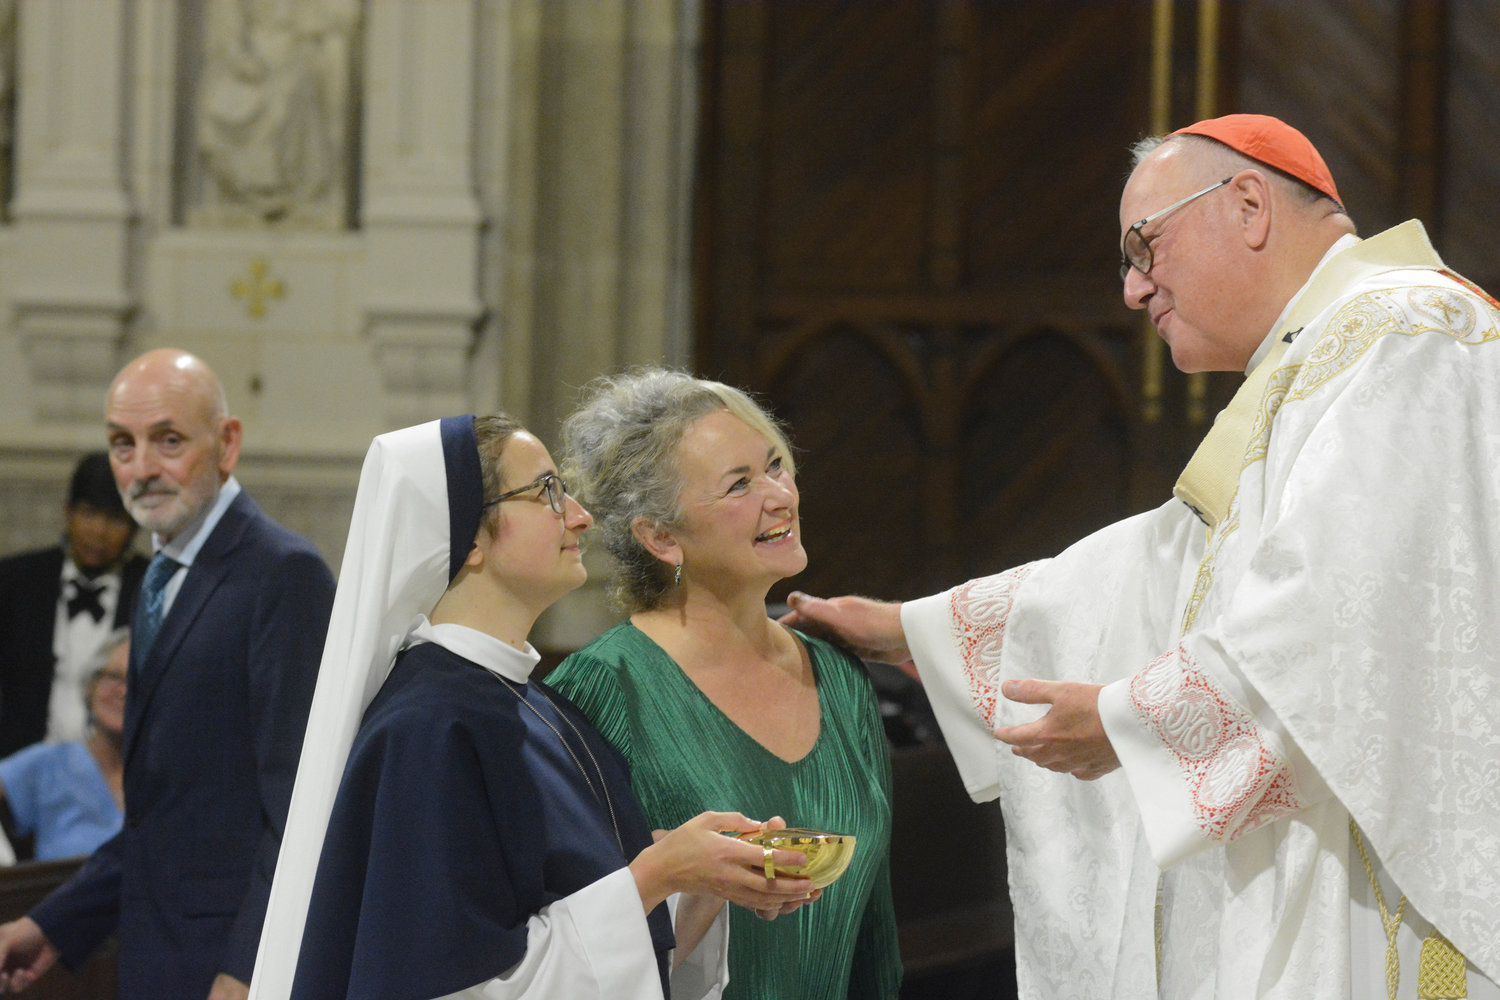 Cardinal Dolan speaks with Sister Caroline Caritas, S.V., as she presents offertory gifts during the Aug. 6 Mass for the perpetual profession of vows for the Sisters of Life at St. Patrick’s Cathedral. Sister Caroline Caritas is joined by her mother, Tracey Ingold.